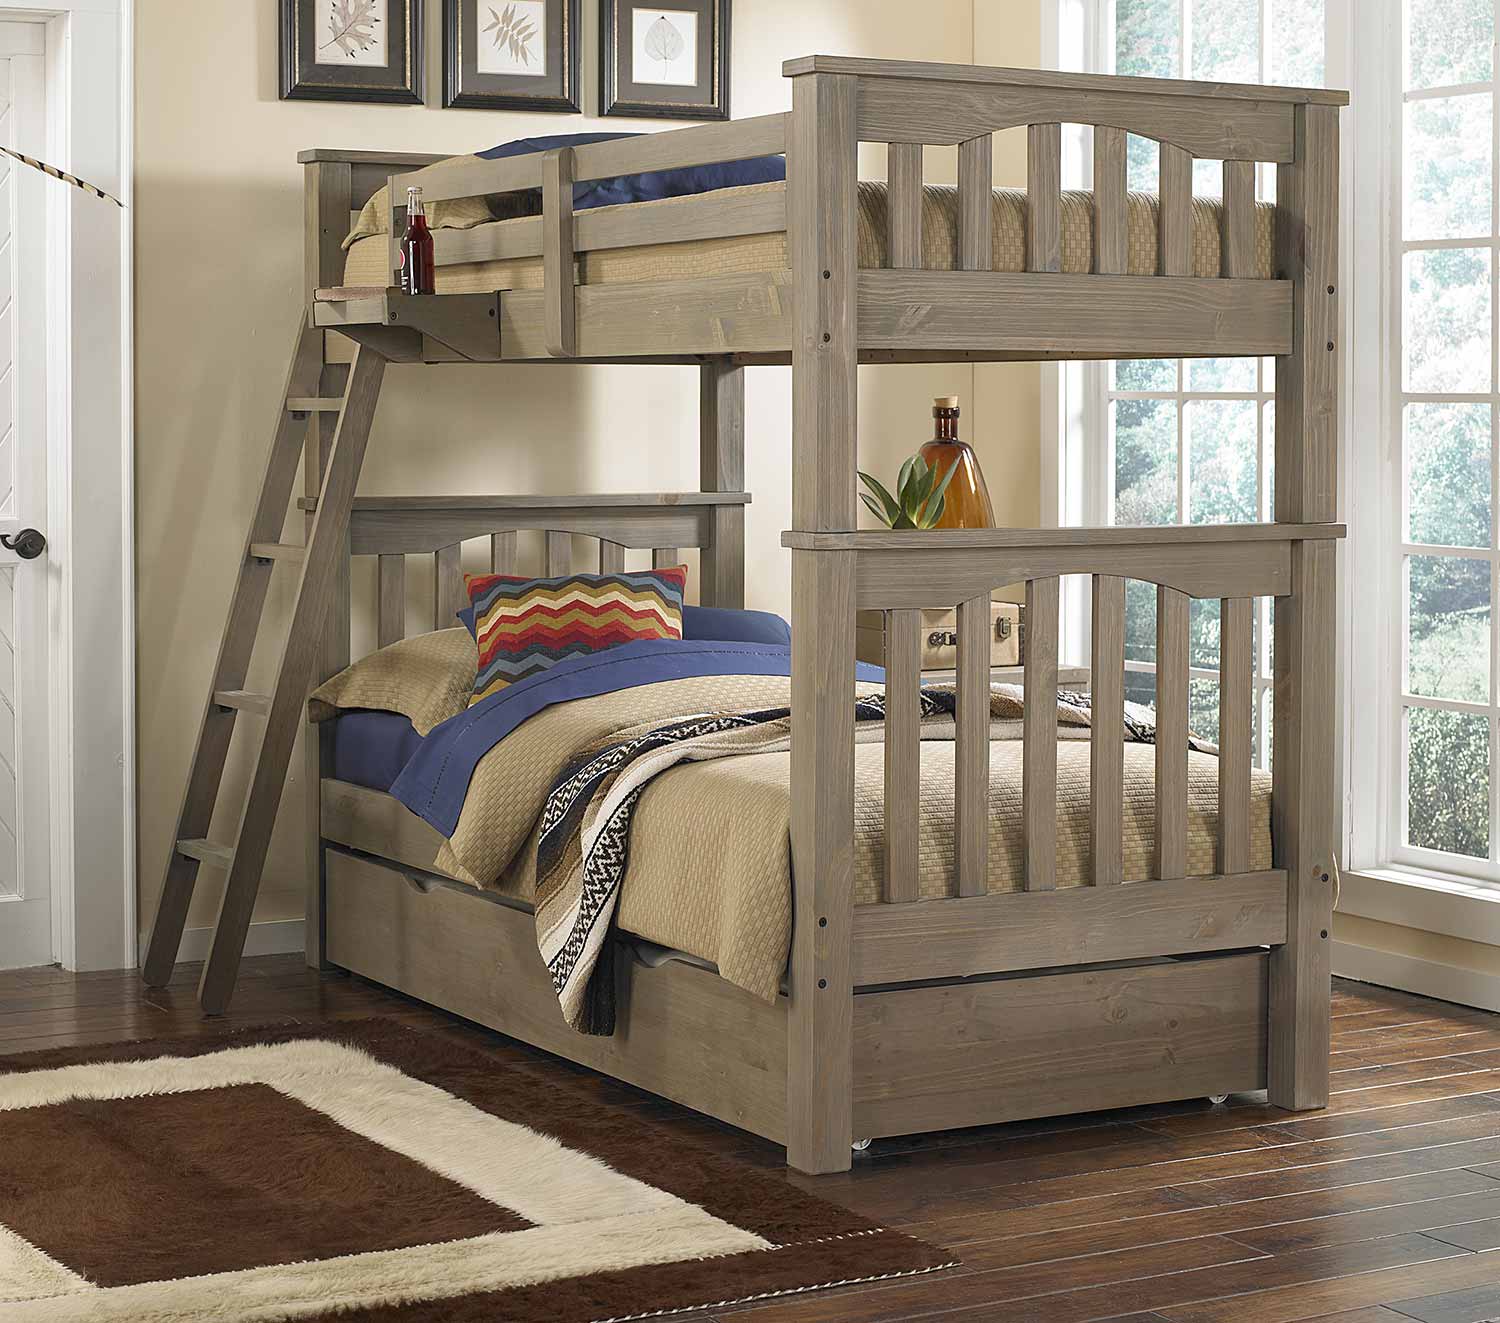 NE Kids Highlands Harper Twin/Twin Bunk With Trundle - Driftwood